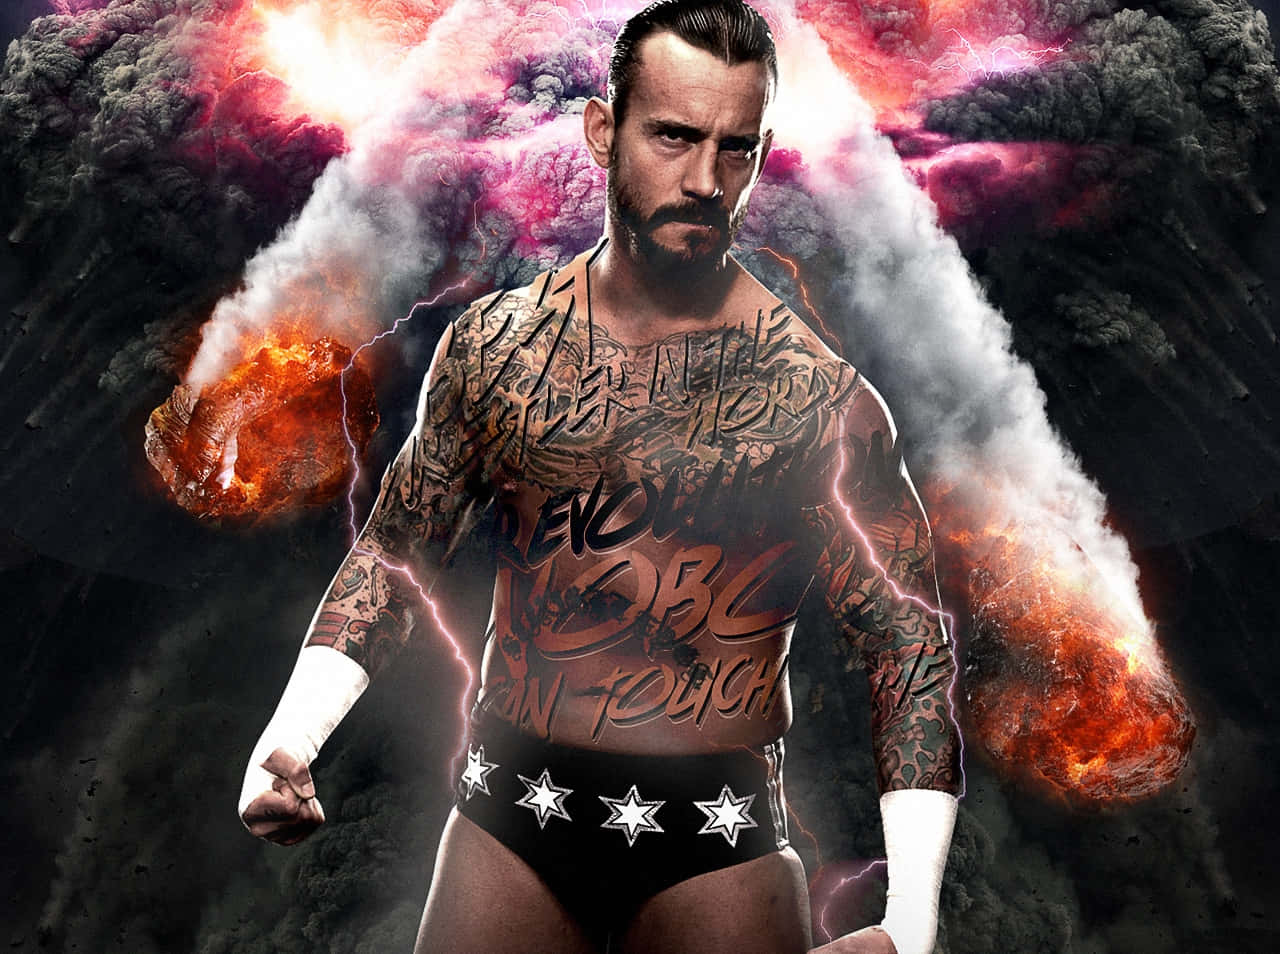 Wwe Wrestler With Tattoos In Front Of A Fireball Wallpaper